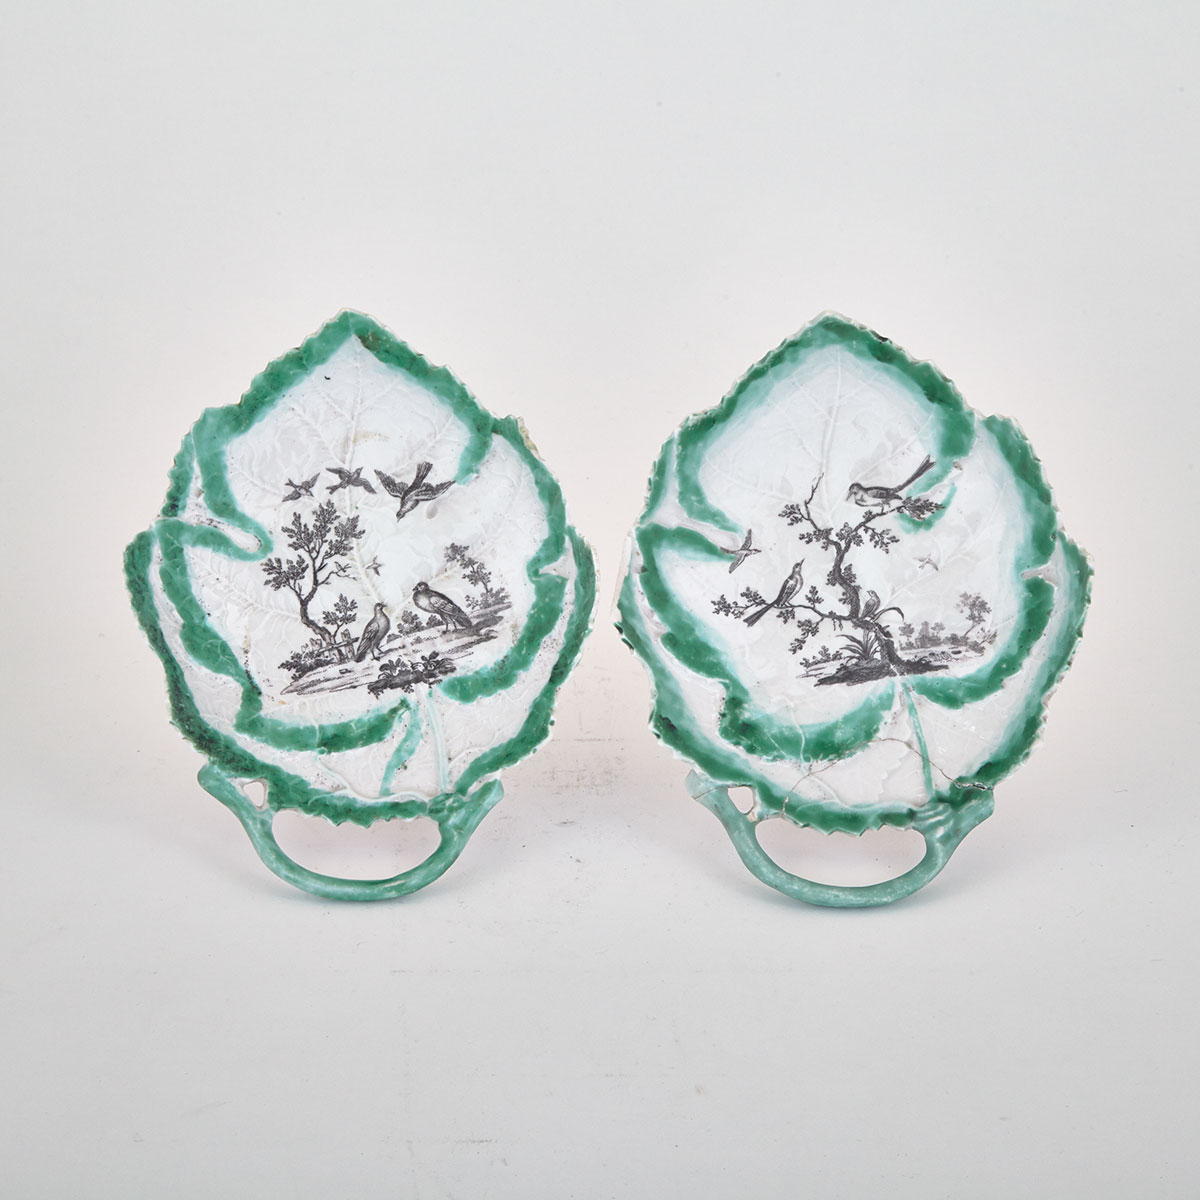 Pair of Worcester Leaf Shaped Dishes, c.1760